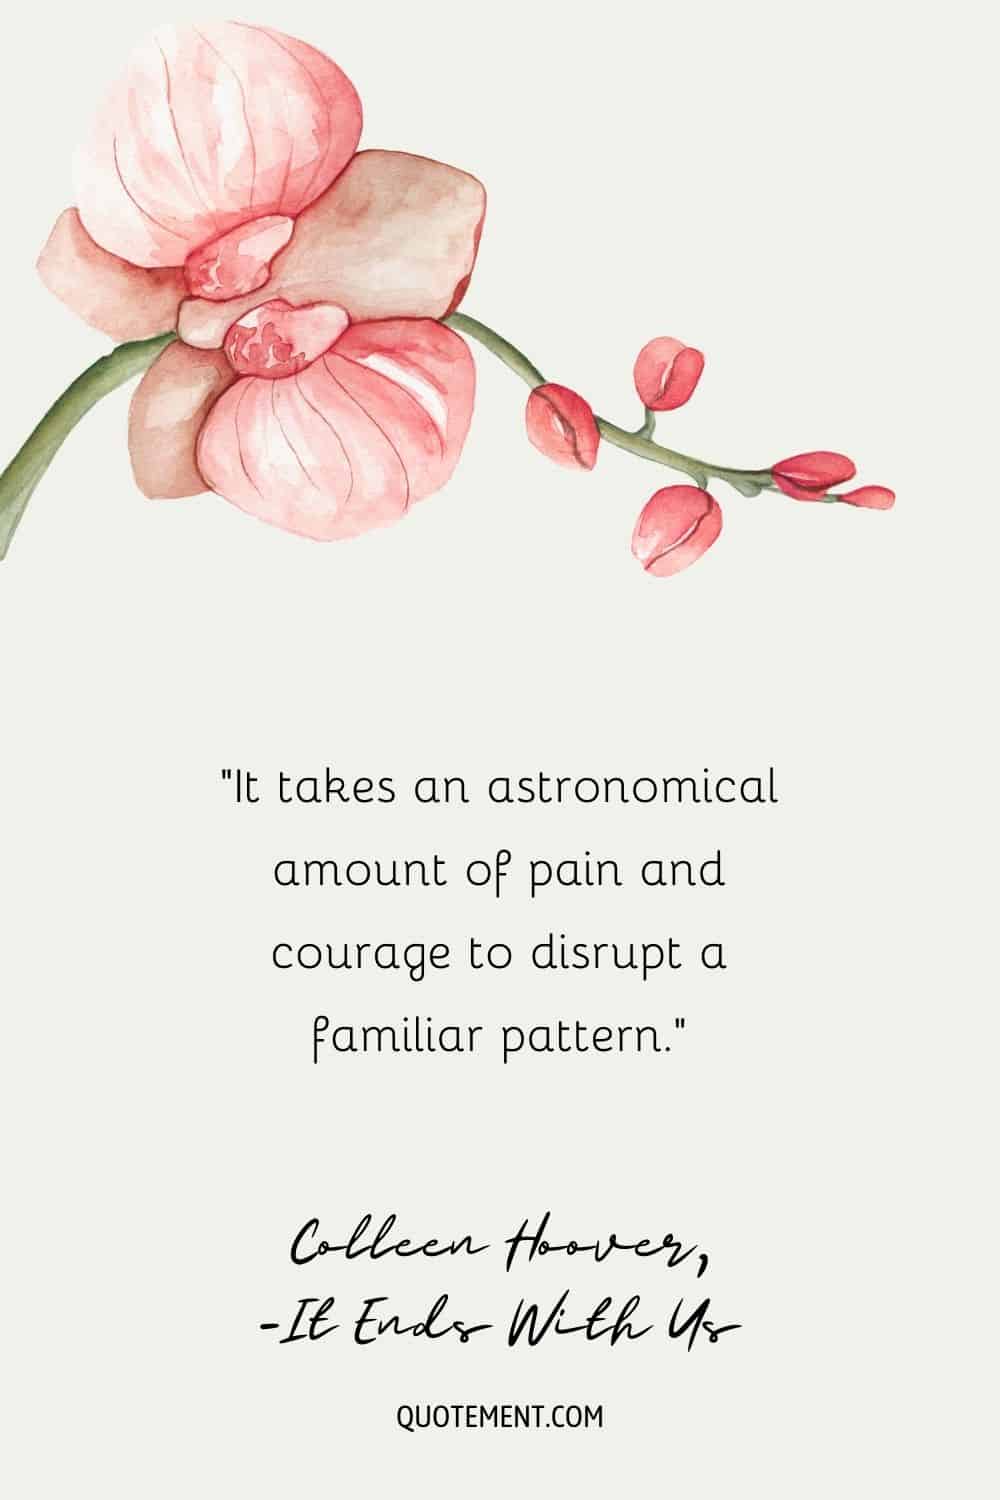 Floral illustration with a quote on disrupting familiar patterns.
